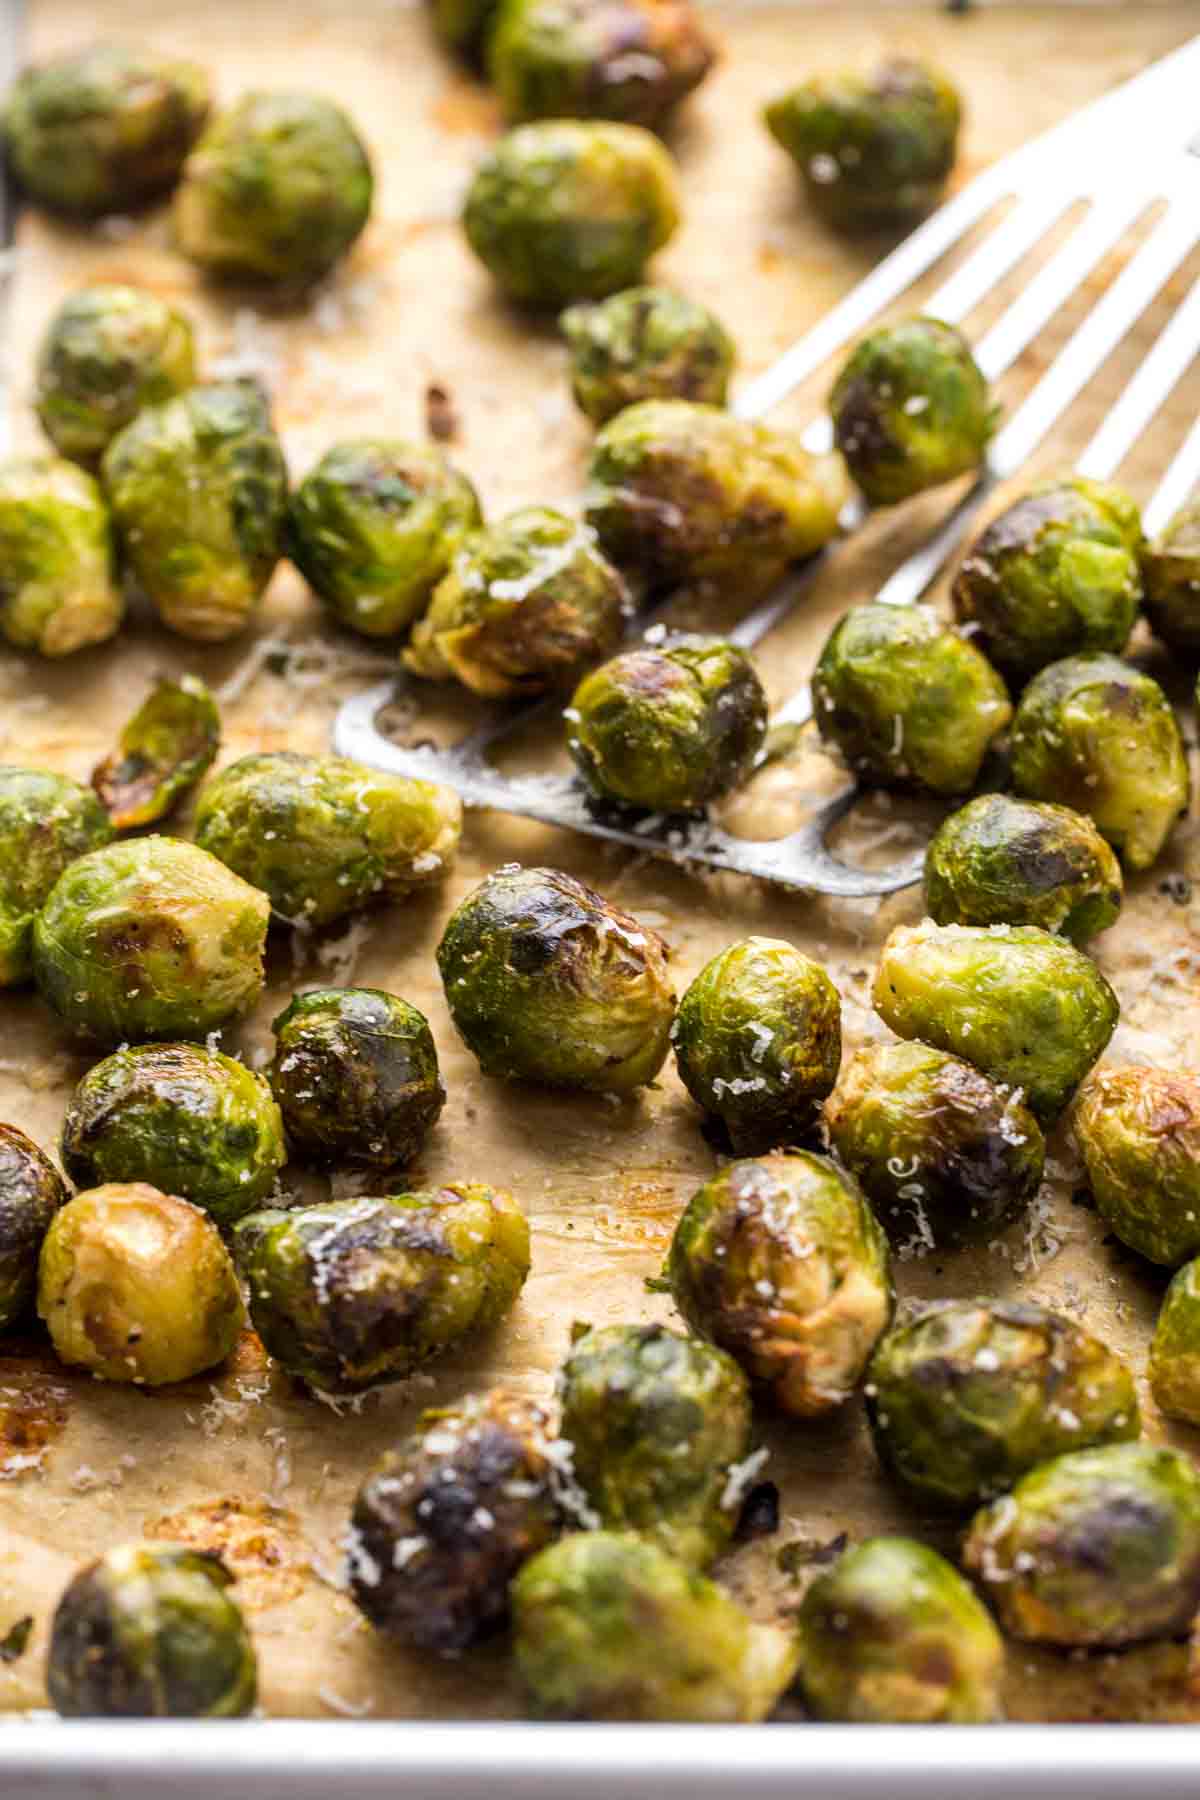 Roasted brussels sprouts on parchment paper, with a fish turner to flip them.